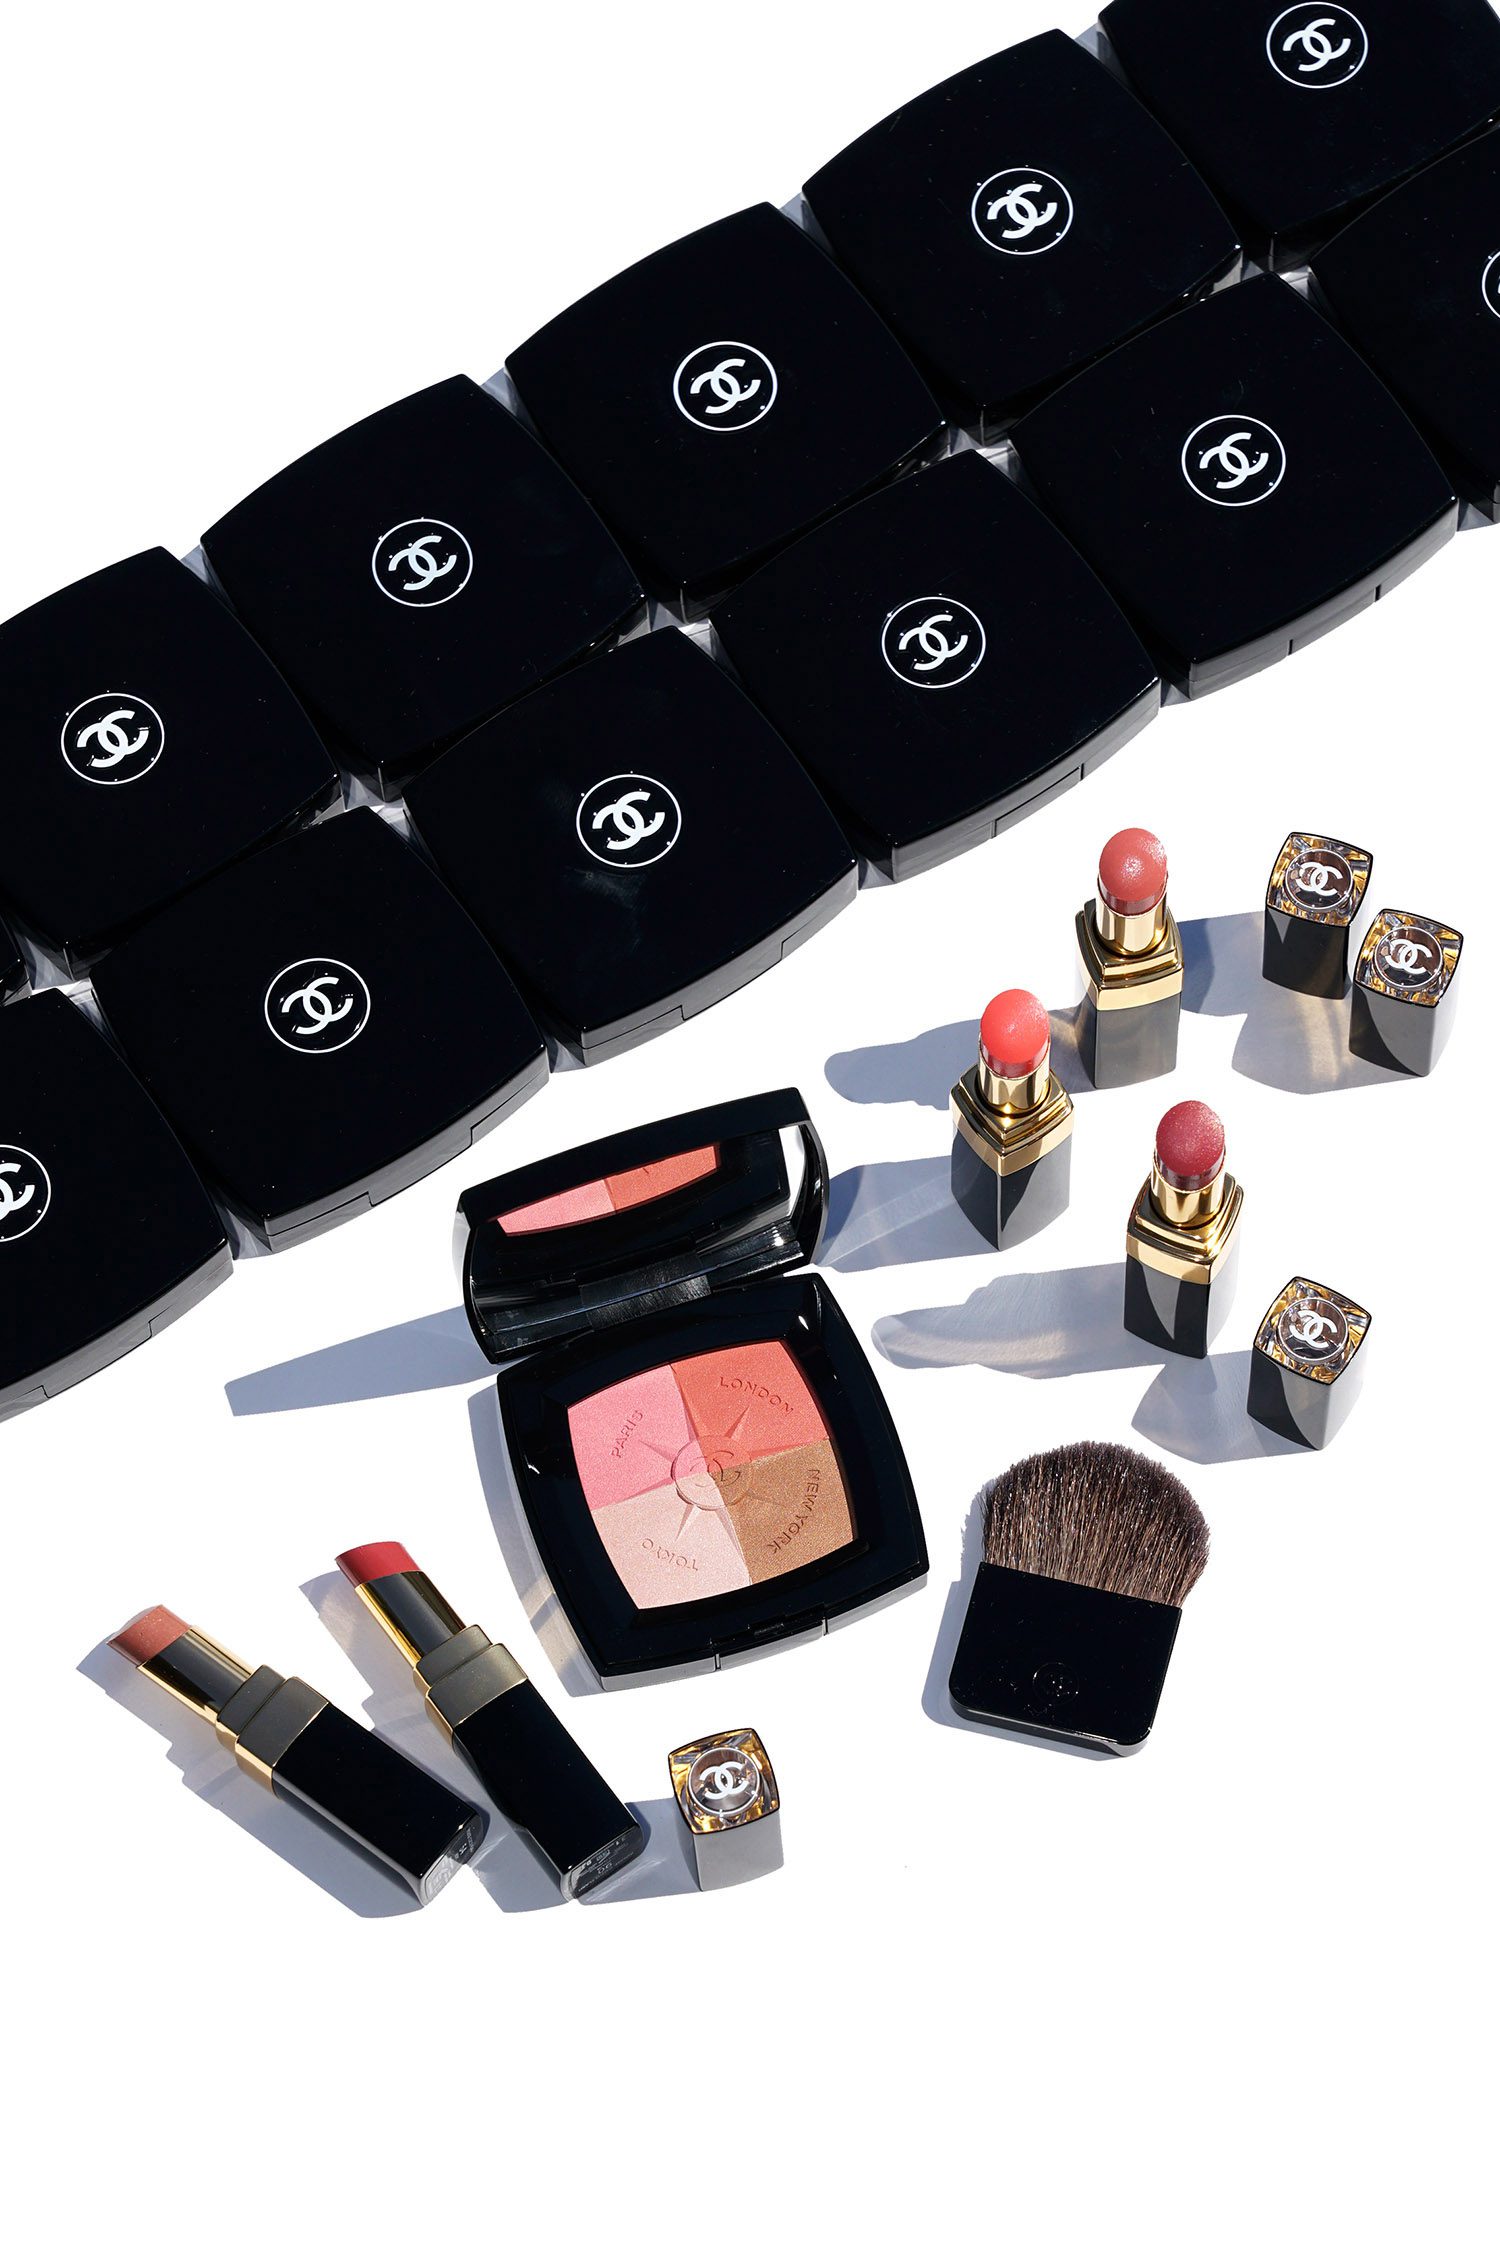 Chanel Rouge Coco Flash Picks + Voyage de Chanel Travel Face Palette - The Beauty Look Book